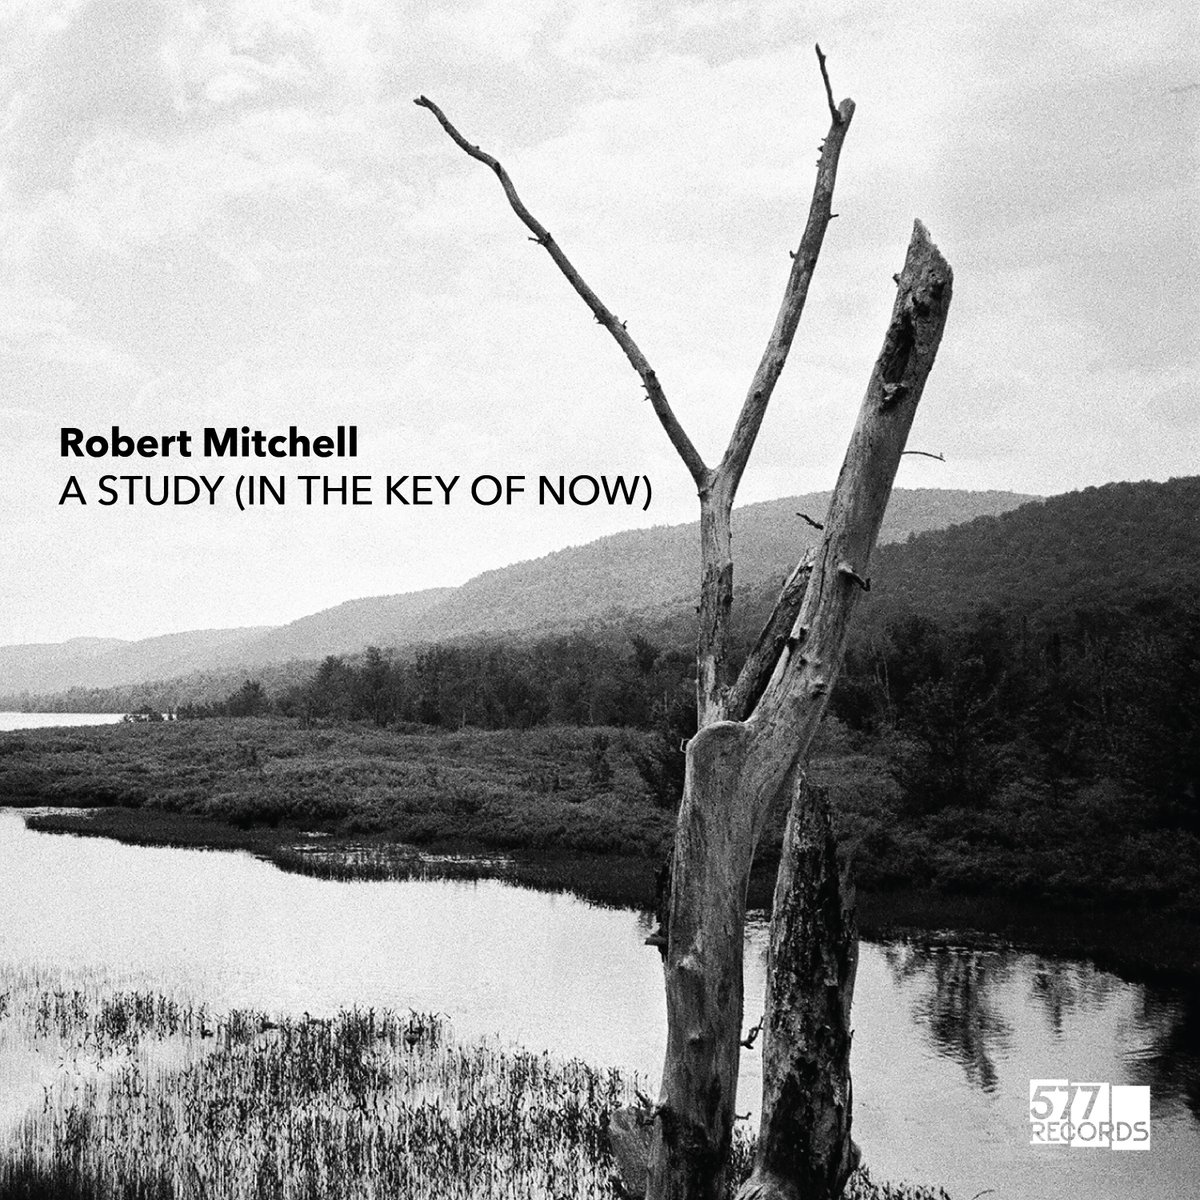 Happy release day to @robertmitchellm! 'A Study (In The Key Of Now)' is out on @577Records today & the launch gig at @TheLescar #Sheffield is happening tonight, #jazz #Wednesday! Come along jazzatthelescar.com @JazzSheffield @jazzteabeer